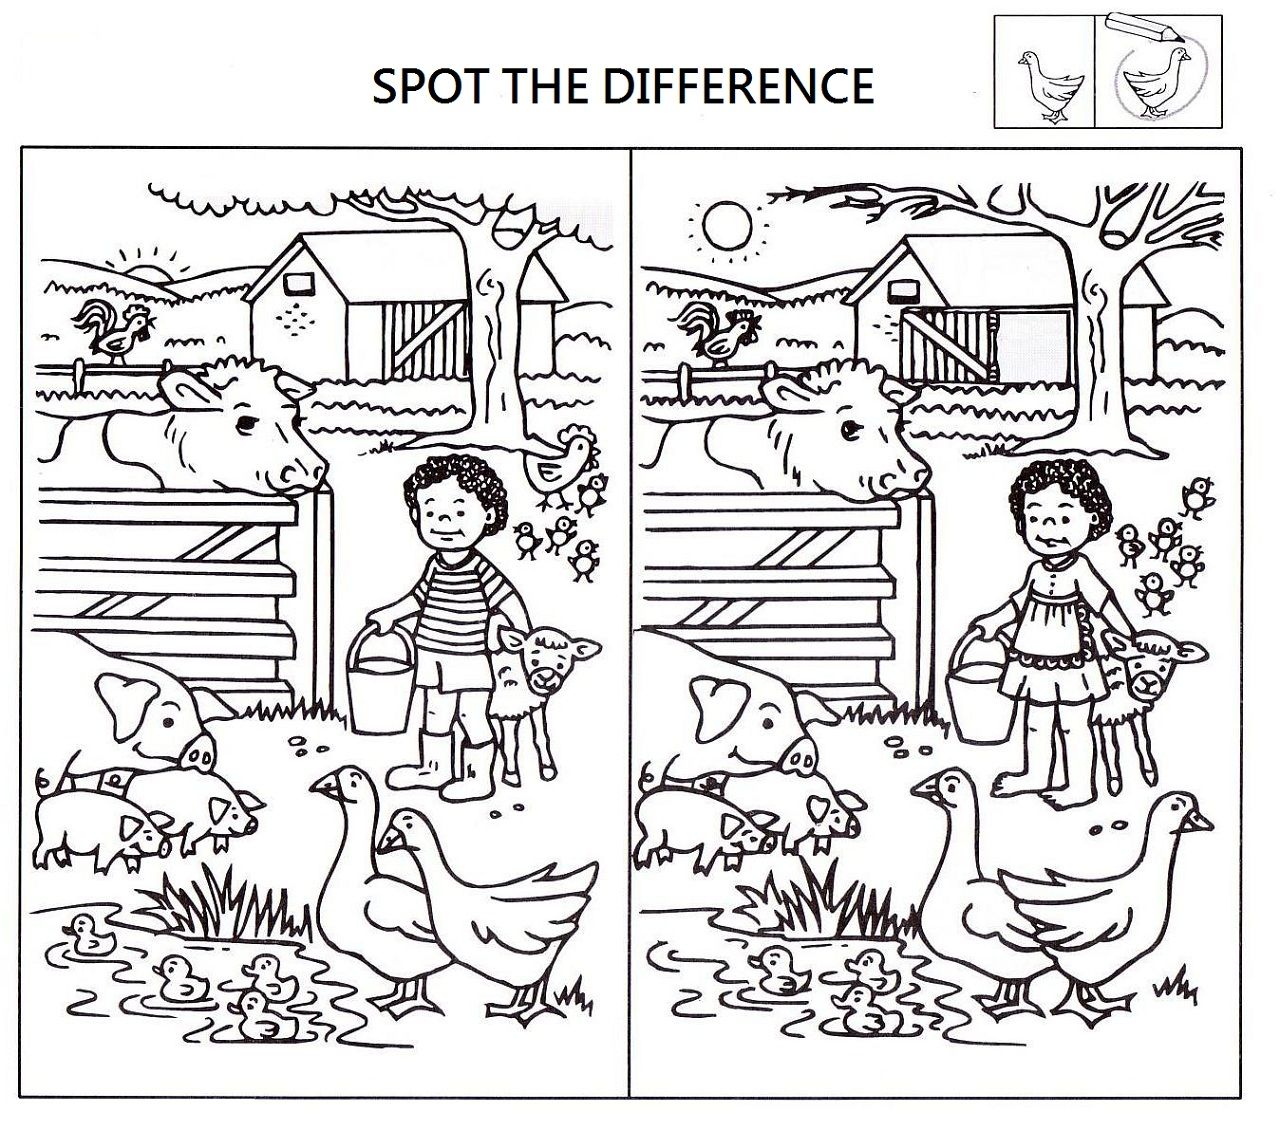 Spot The Difference Printable_15847